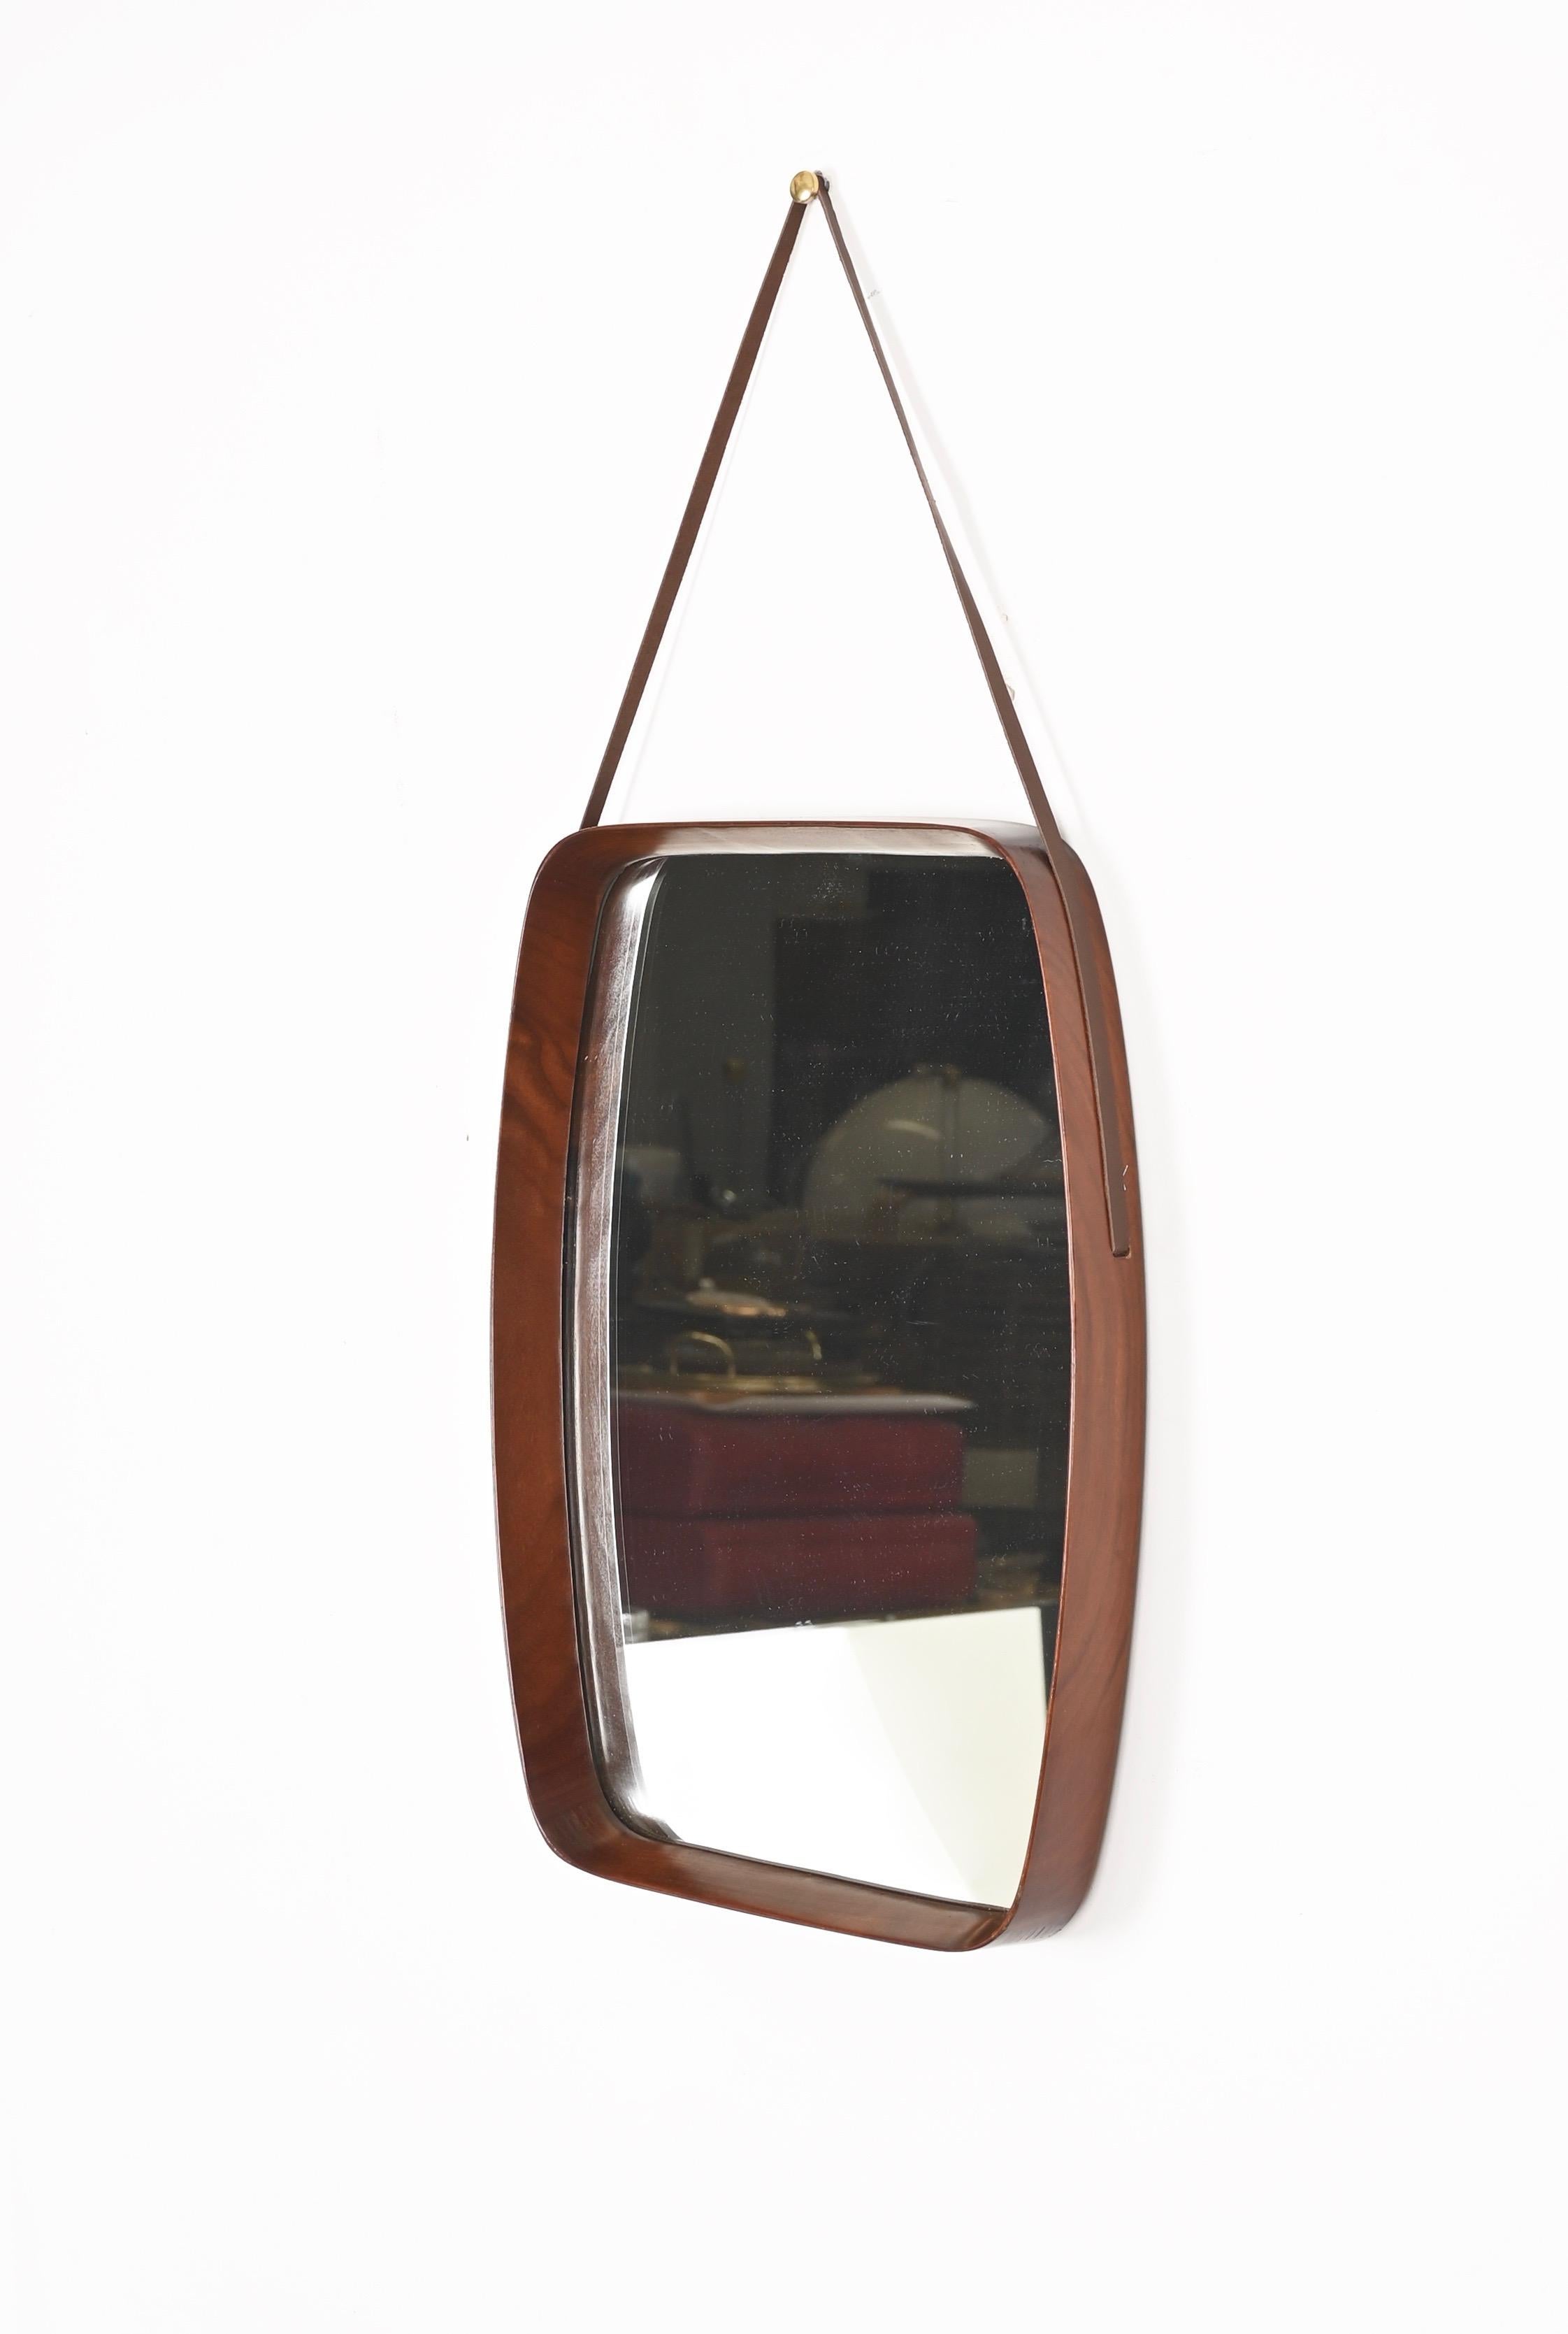 Mid-Century Rectangular Mirror in Teak, Leather by Campo & Graffi, Italy 1960s For Sale 4